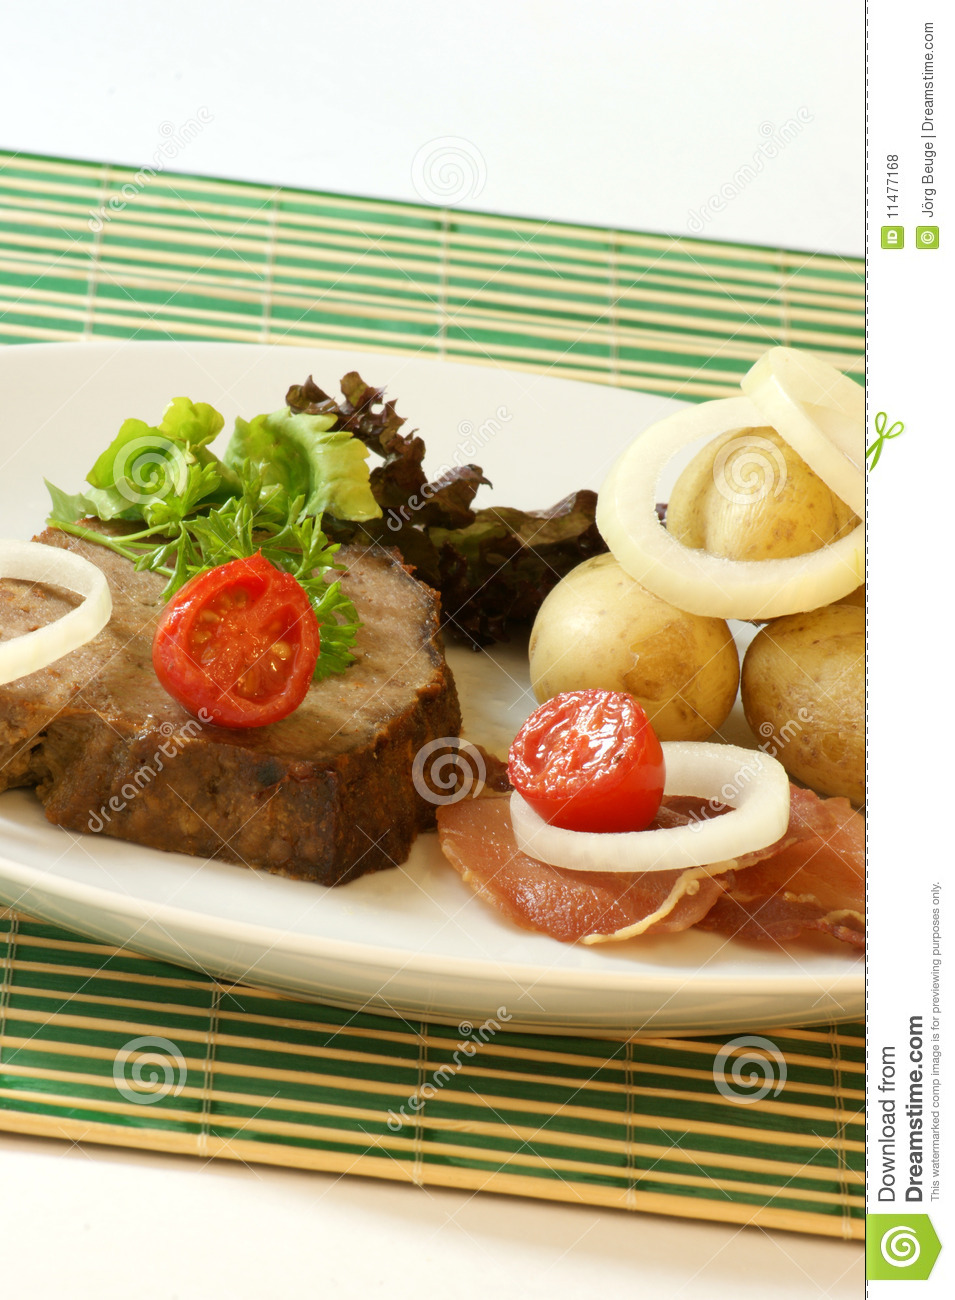 Sliced Meat Loaf With Organic Vegetable Royalty Free Stock Photos